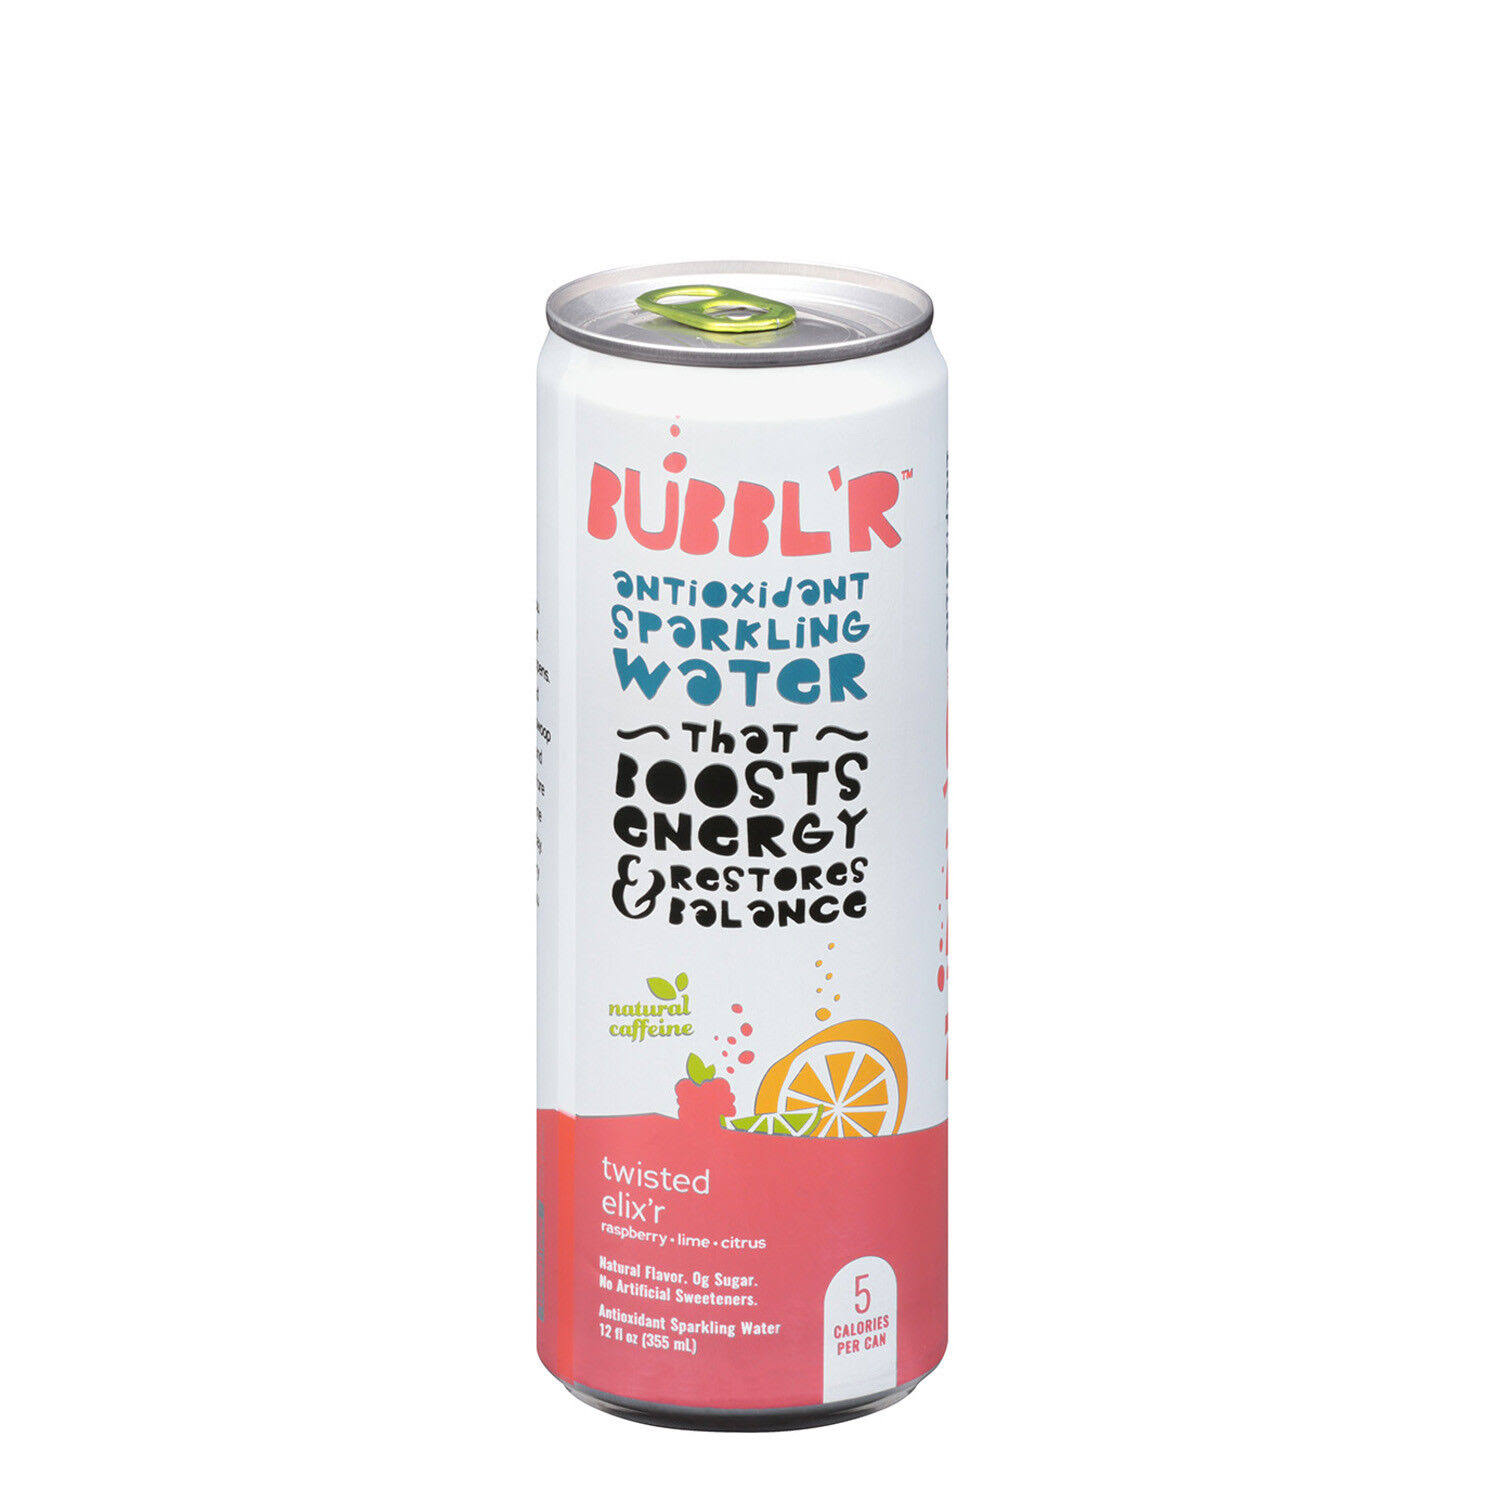 BUBBL'R Twisted Elix'r, Antioxidant Sparkling Water With Natural Caffeine, 0g Sugar, Gluten Free, All Natural Flavors, 12 Fl Oz Cans, 12 Count